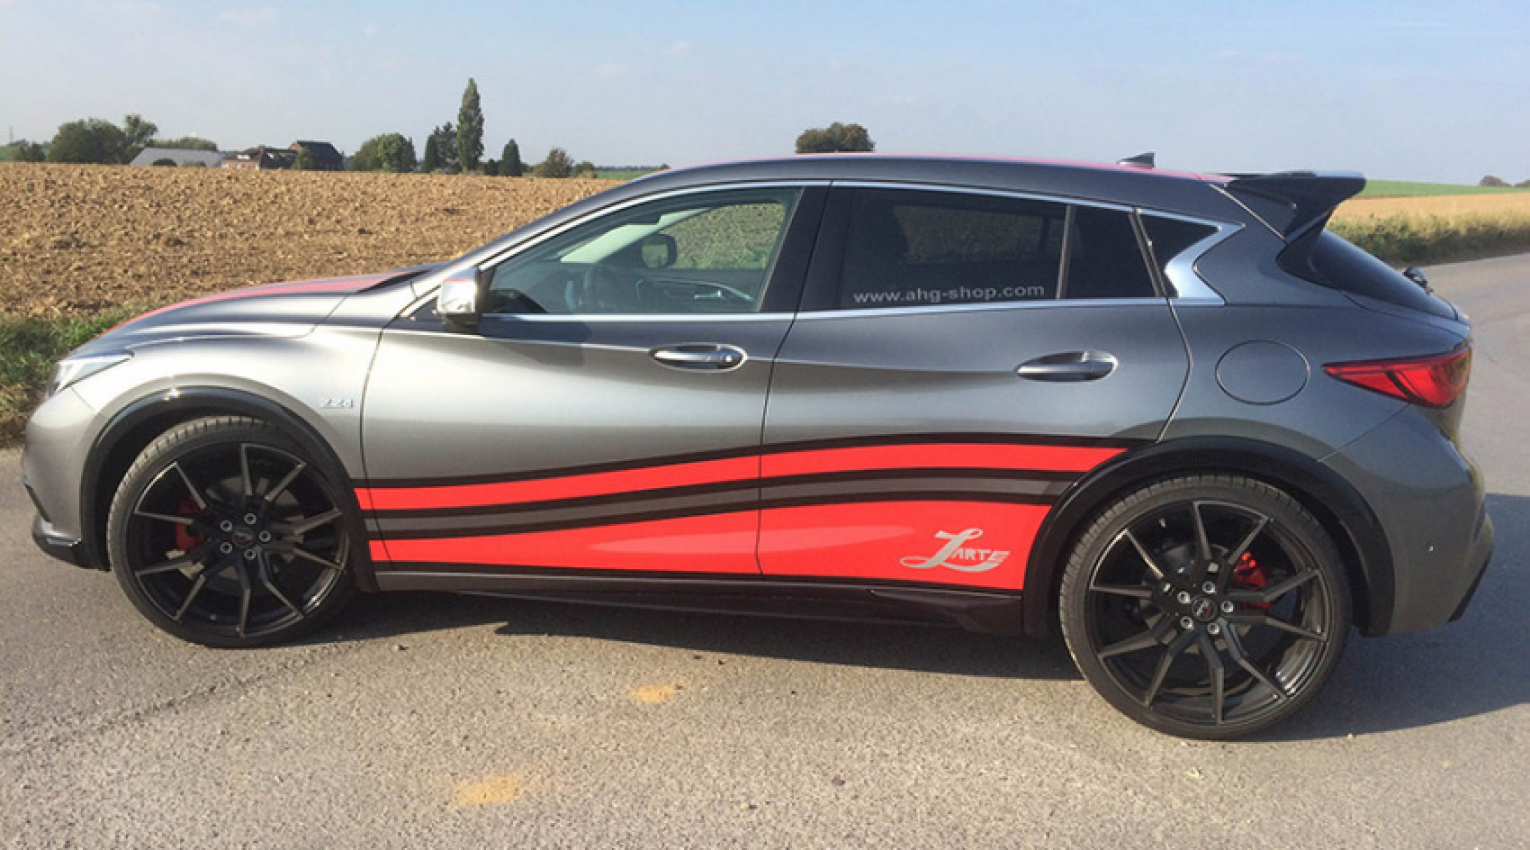 autos, cars, infiniti, larte design presents a new hot hatch! check this infiniti qx30 out!